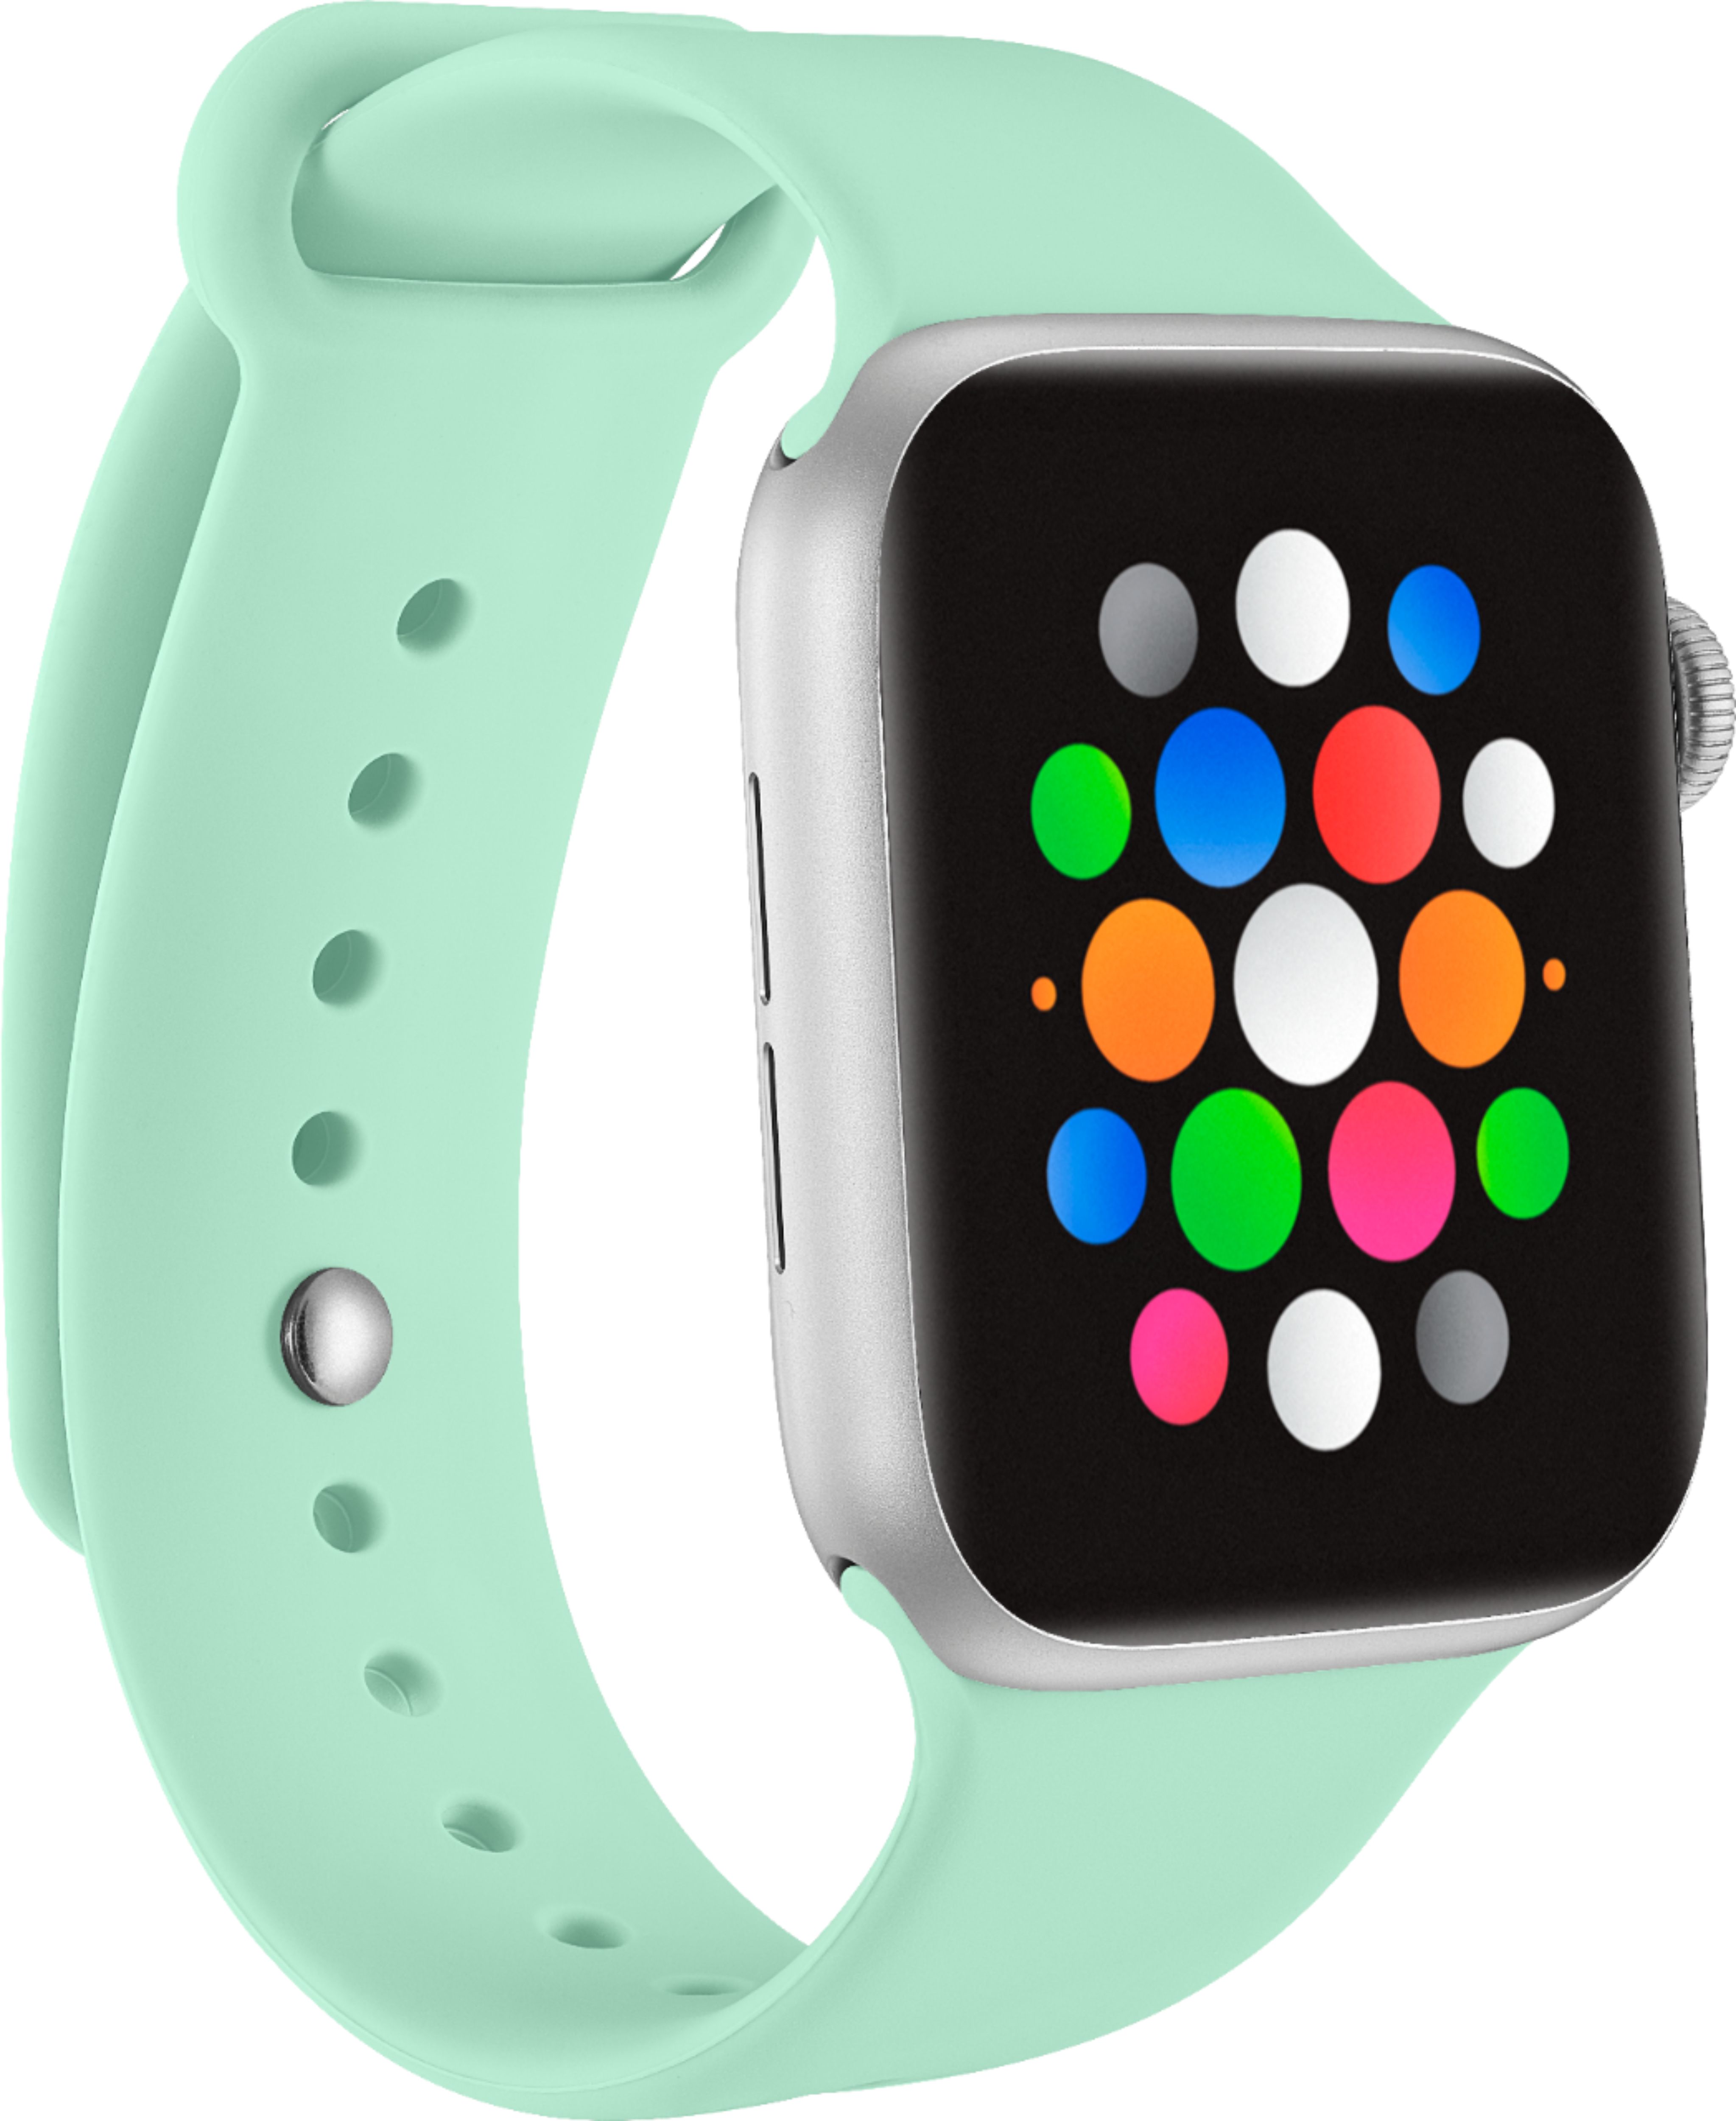 Modal™ - Silicone Band for Apple Watch™ 42mm and 44mm - Mint Green